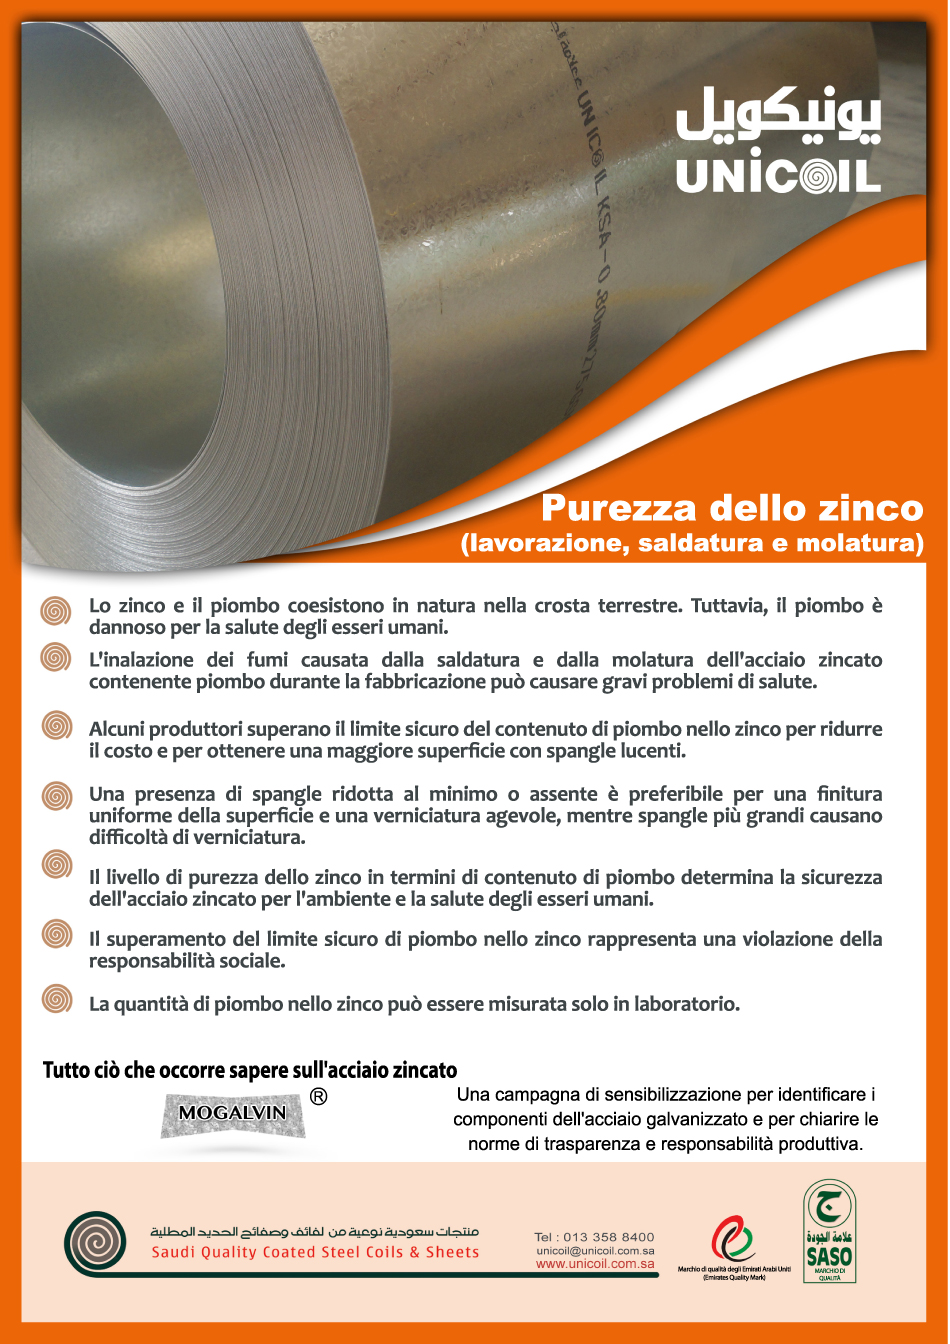 Zinc Purity - Forming and Welding